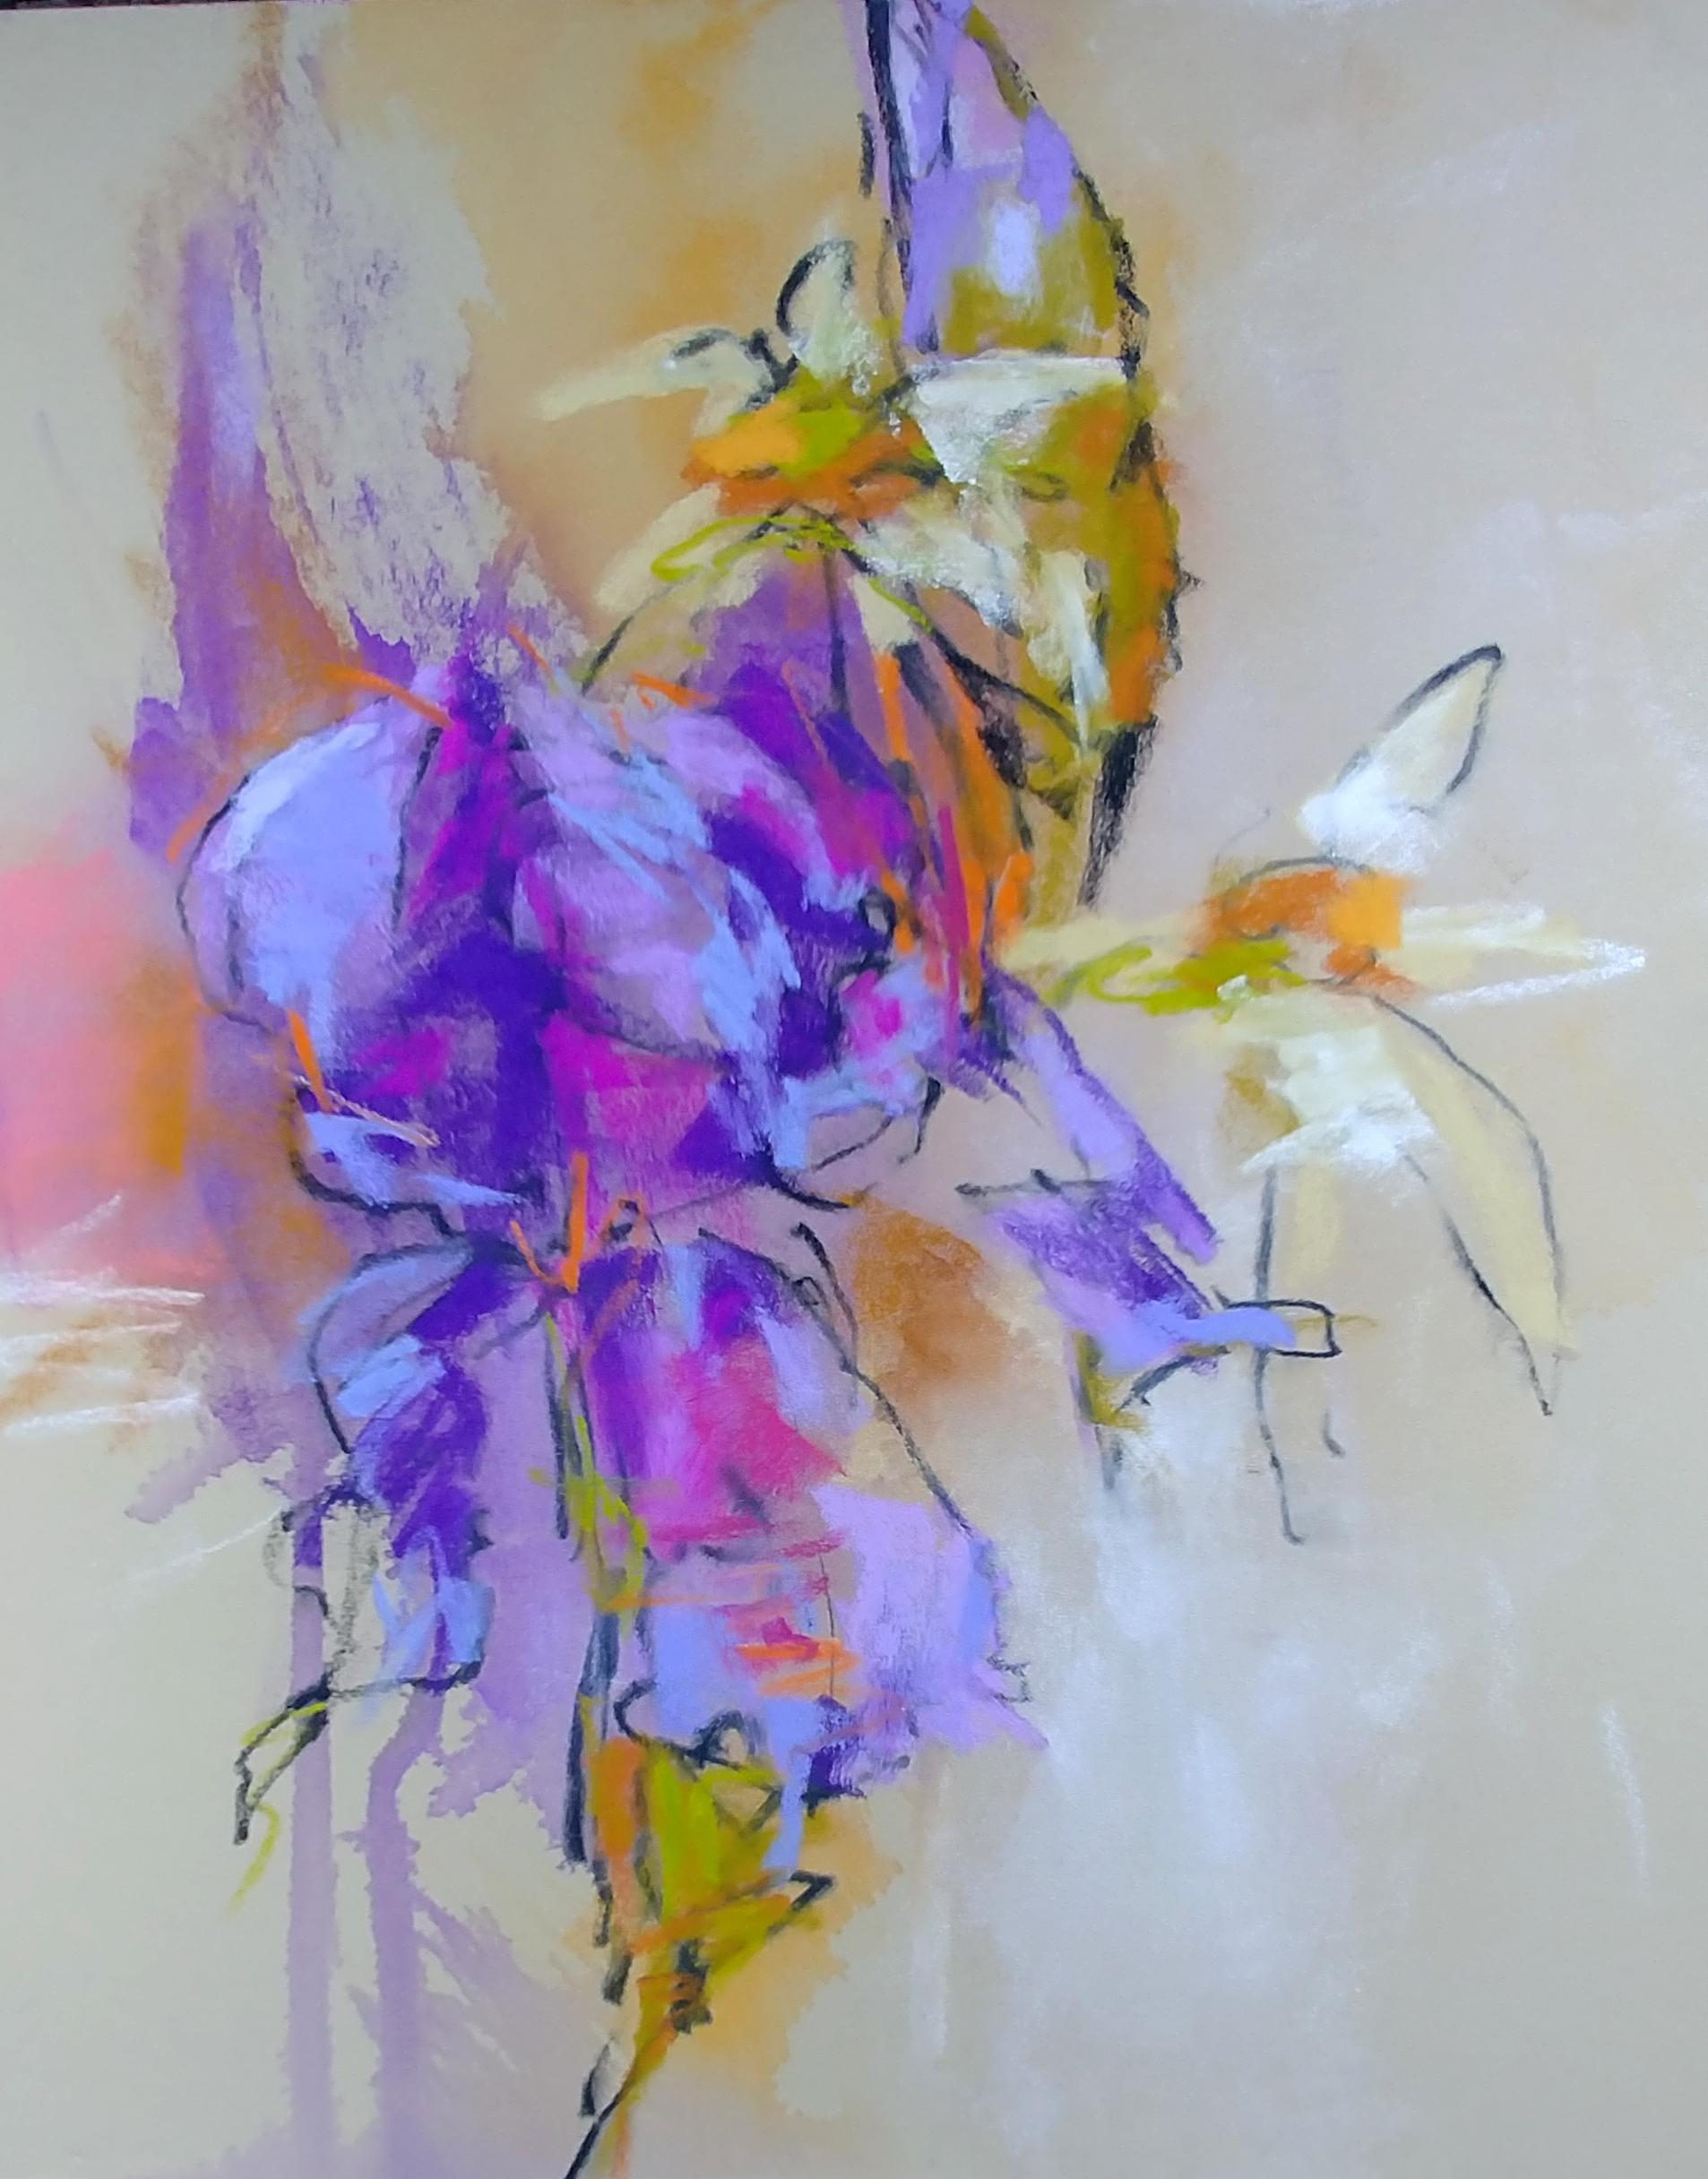 'Monet's Irises II' is a small abstract pastel and mixed media on paper still-life painting of vertical format created by American artist Debora Stewart in 2019. Featuring a vibrant palette made of purple, violet, green, orange and pink tones, this